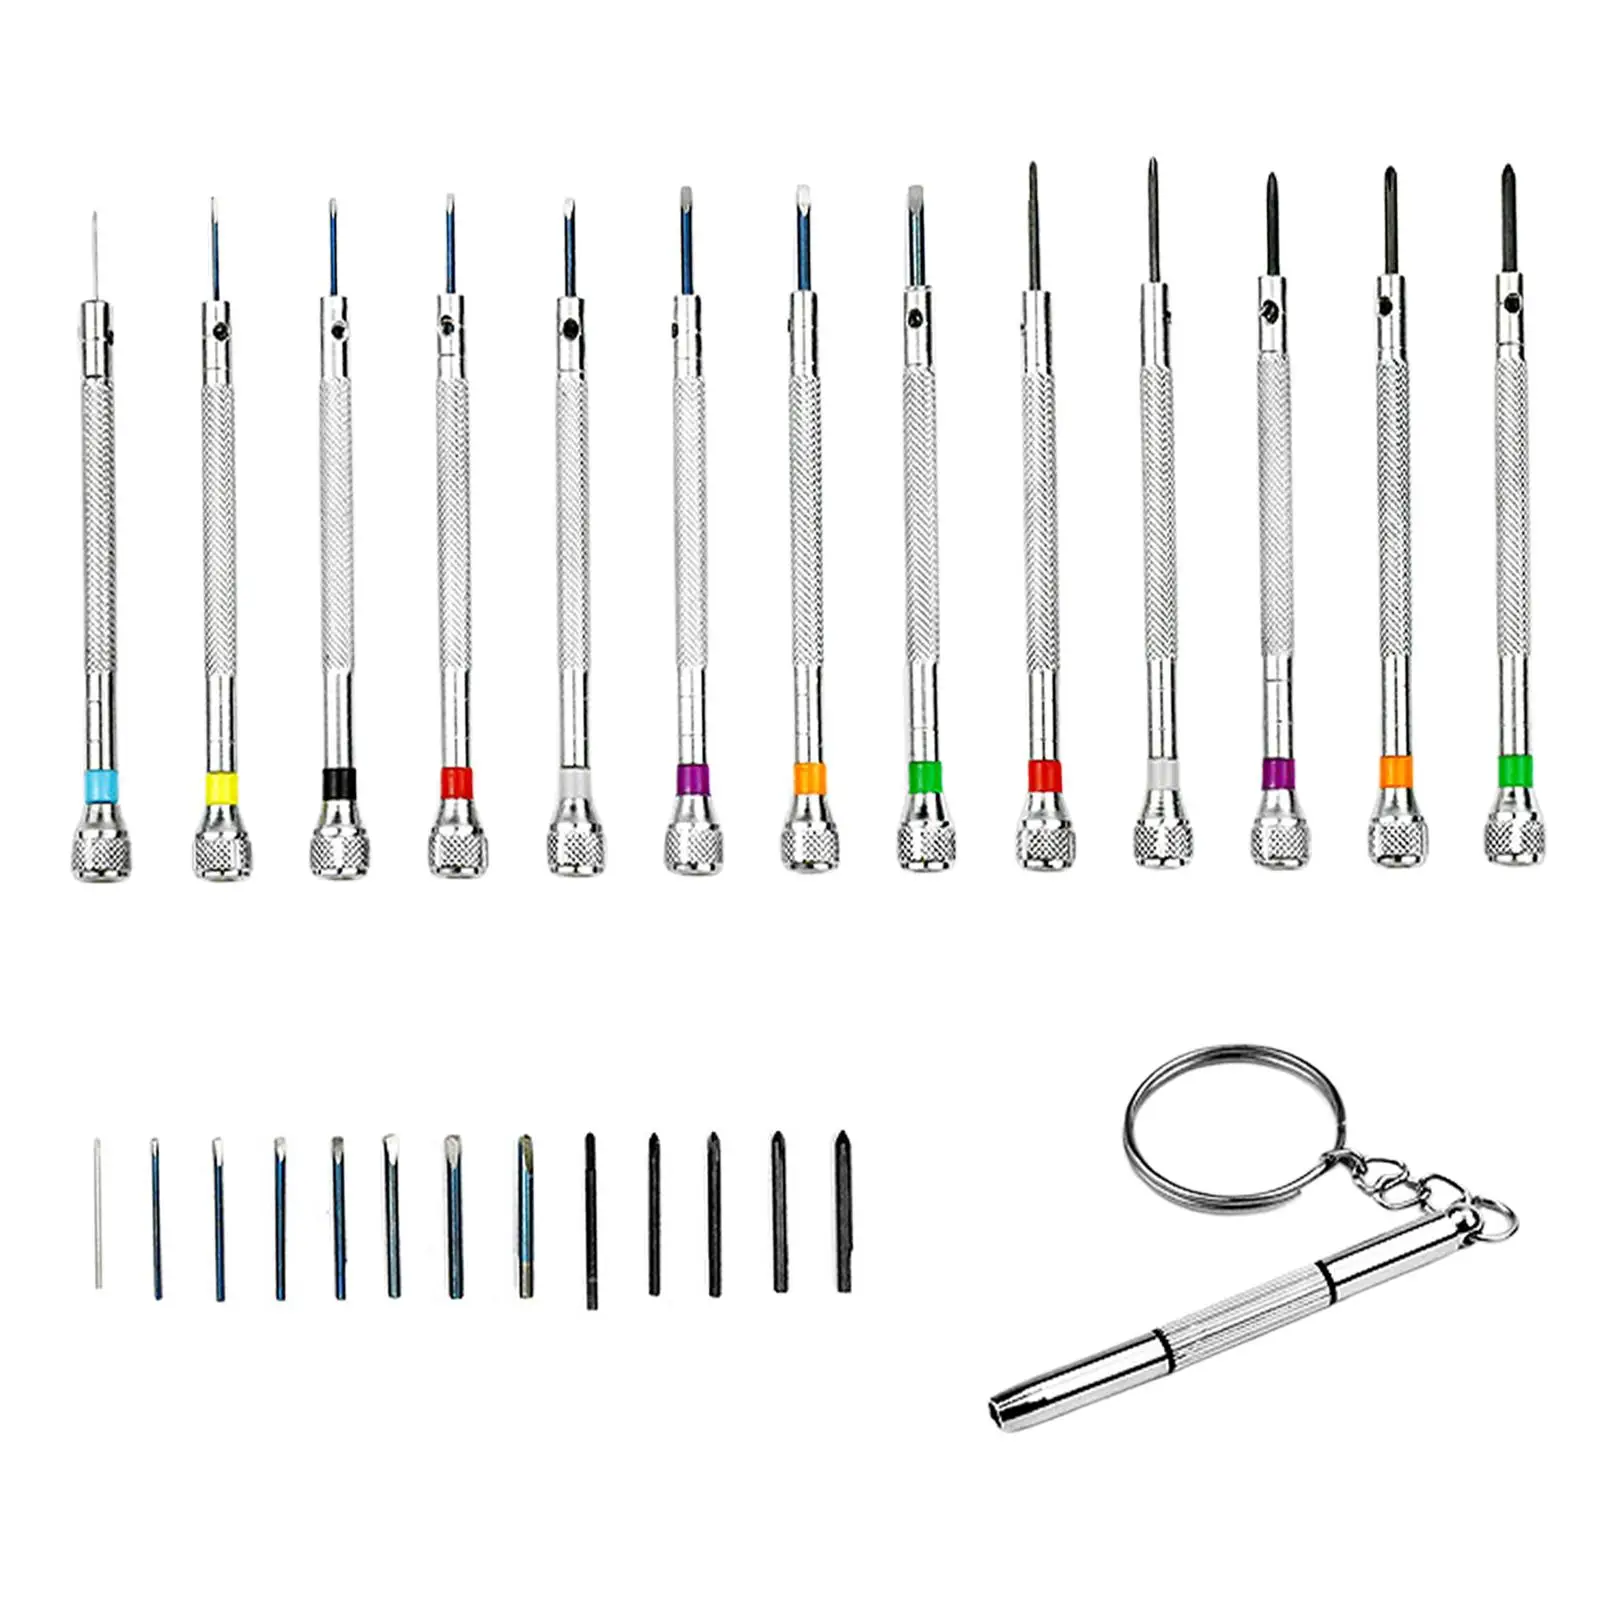 13 Pieces Watch Repair Screwdriver Set Small Premium Multifunction Sturdy for Watch Smartphone Electronices Glasses Repair Tool